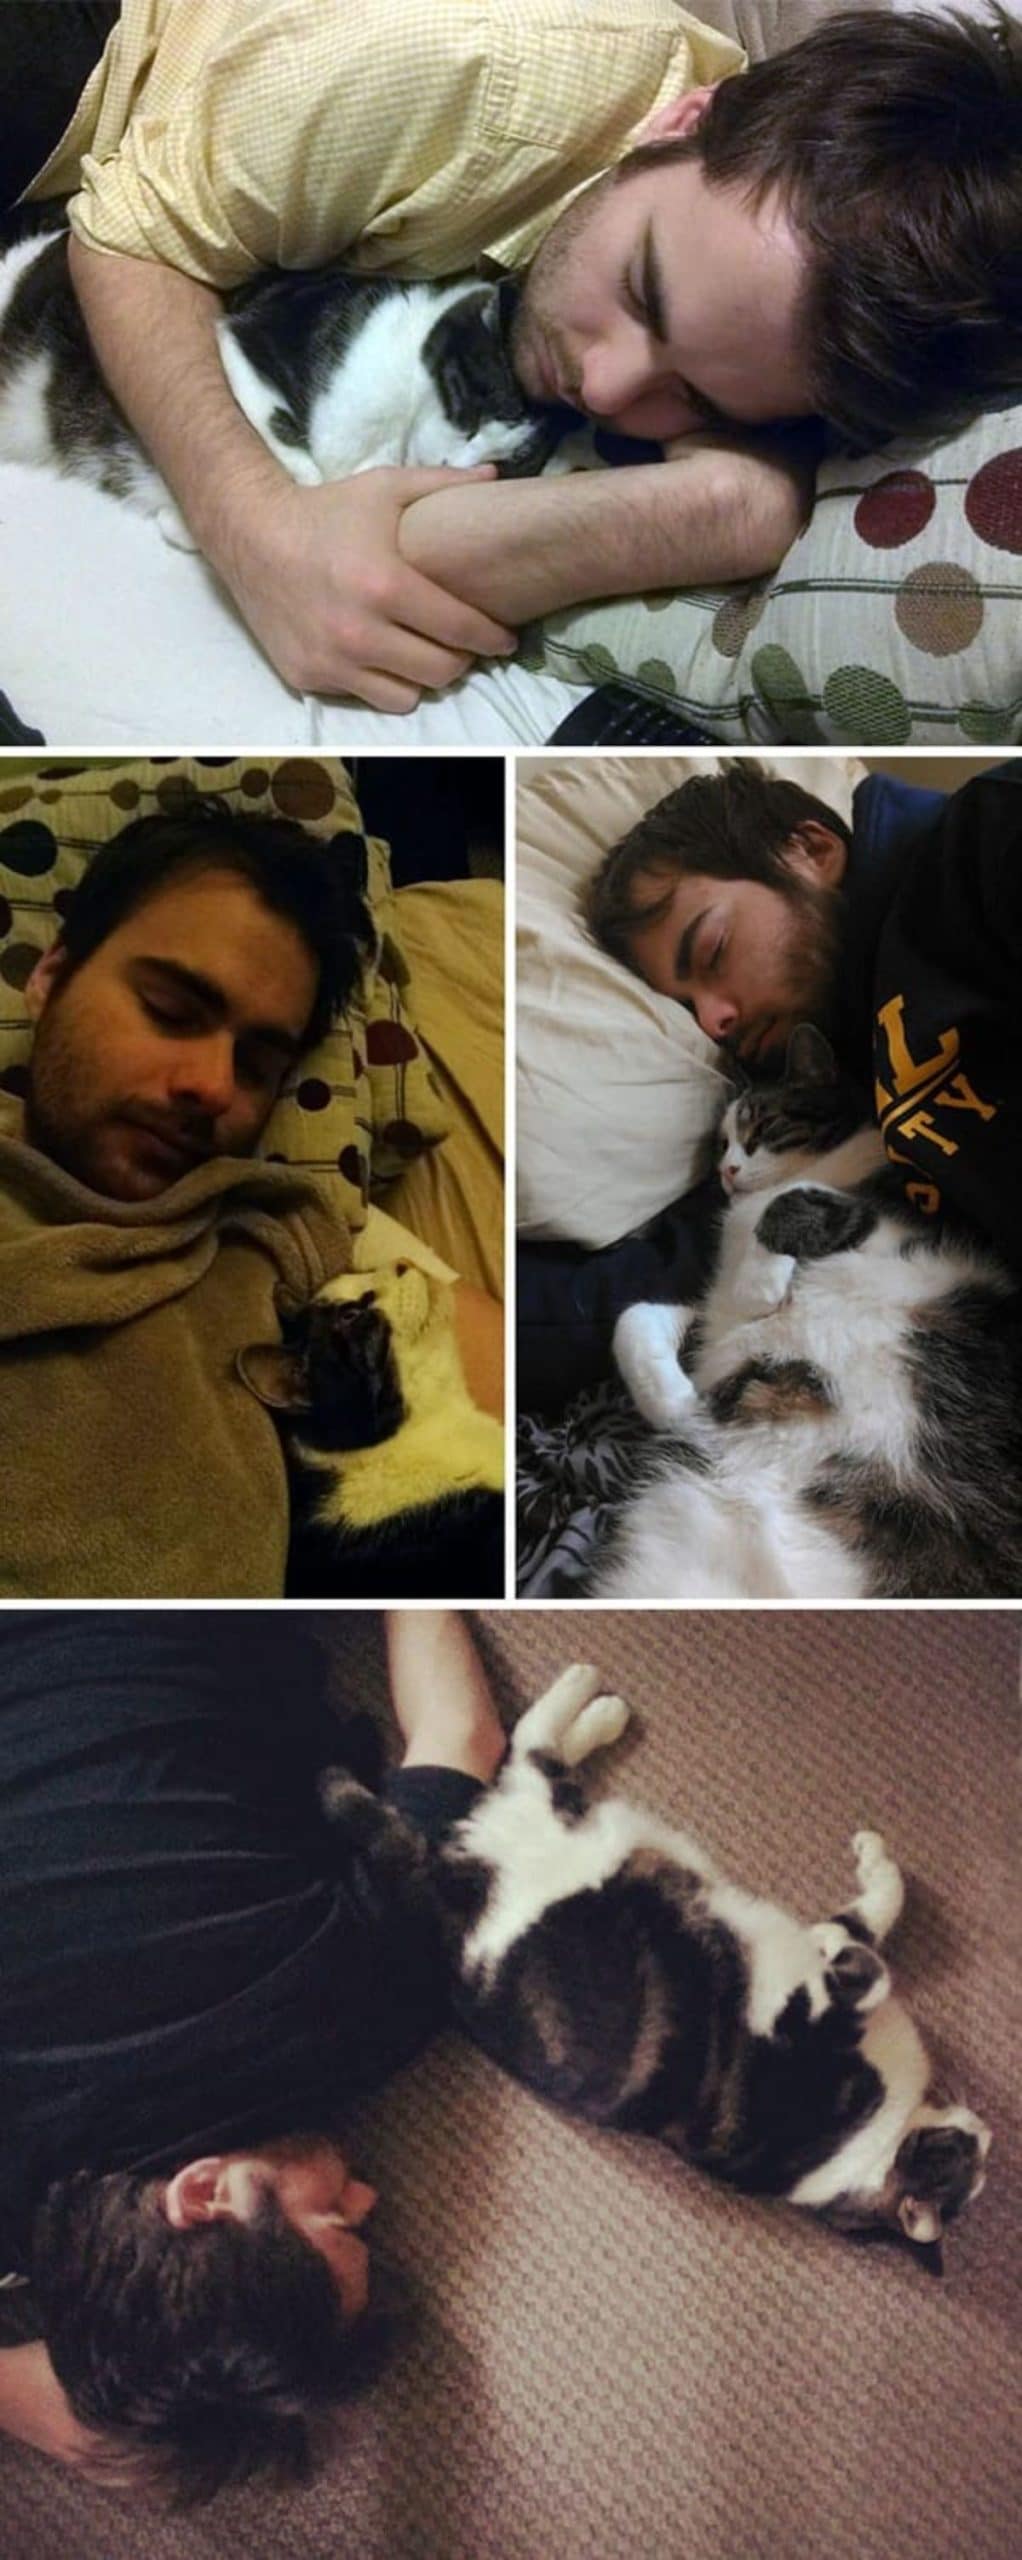 4 photos of a black and white tabby cat sleeping cuddled up with a man